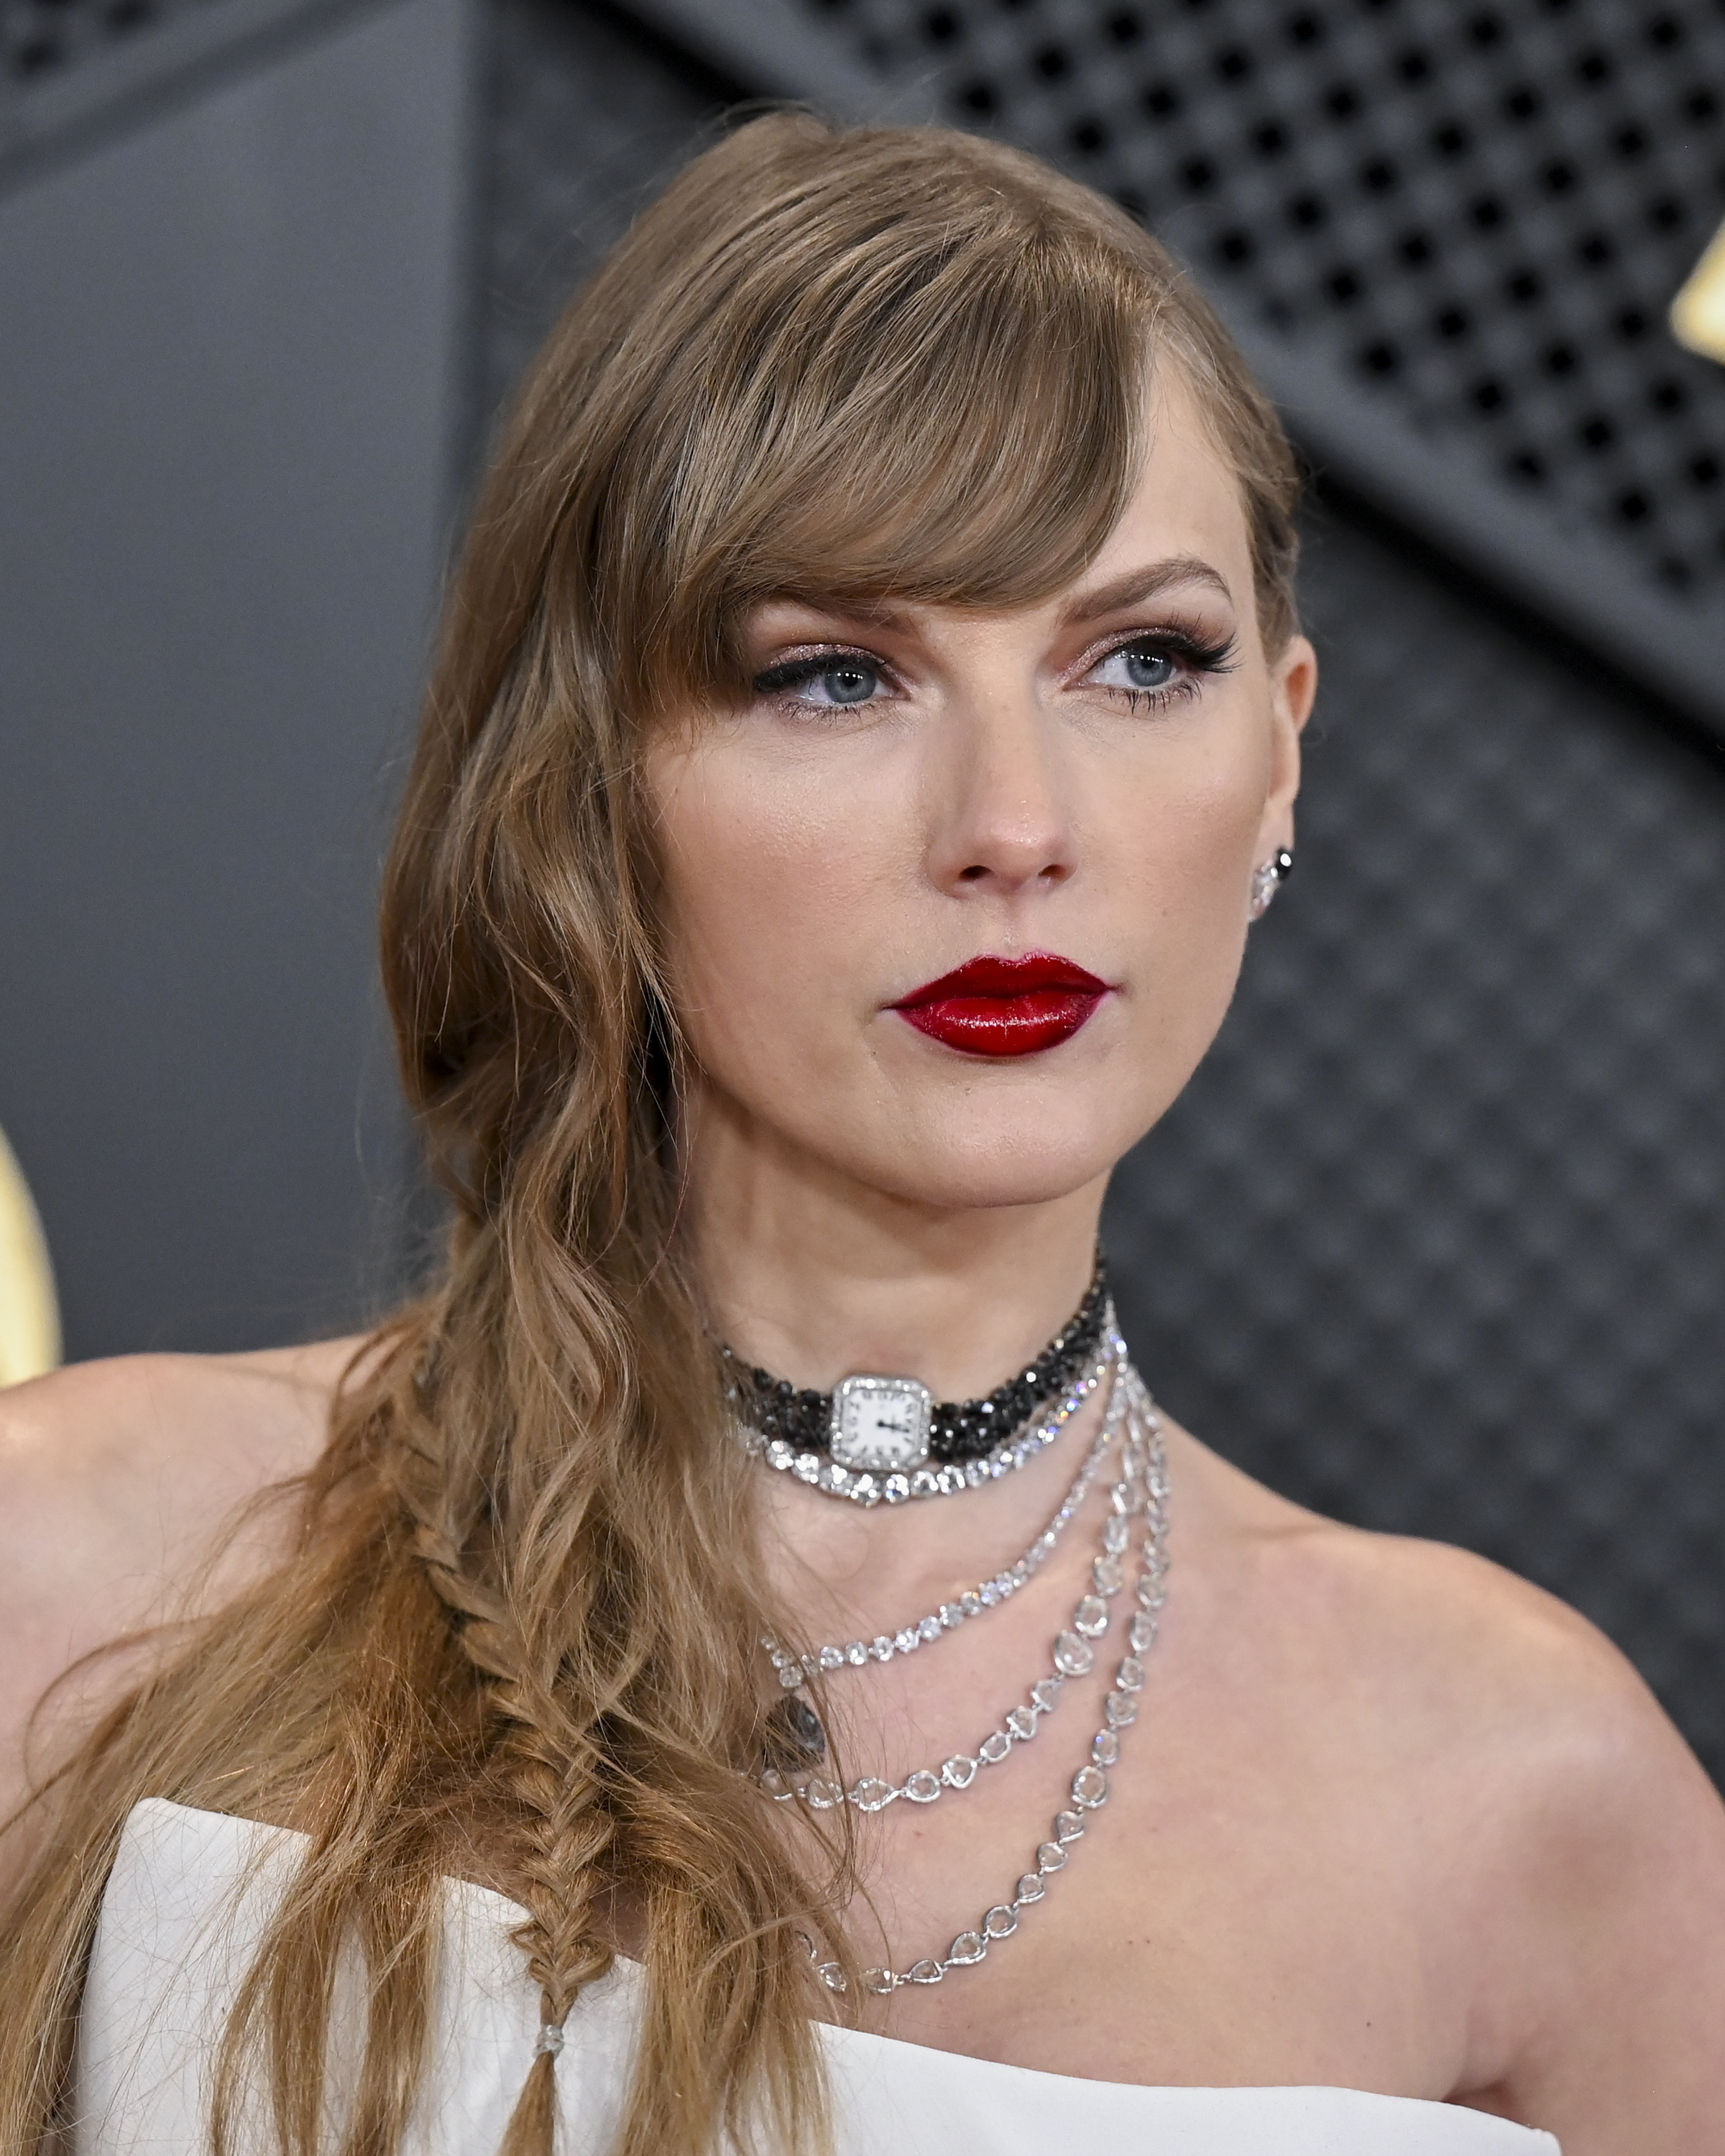 Taylor Swift at an event wearing a strapless dress with a bejeweled choker and red lipstick